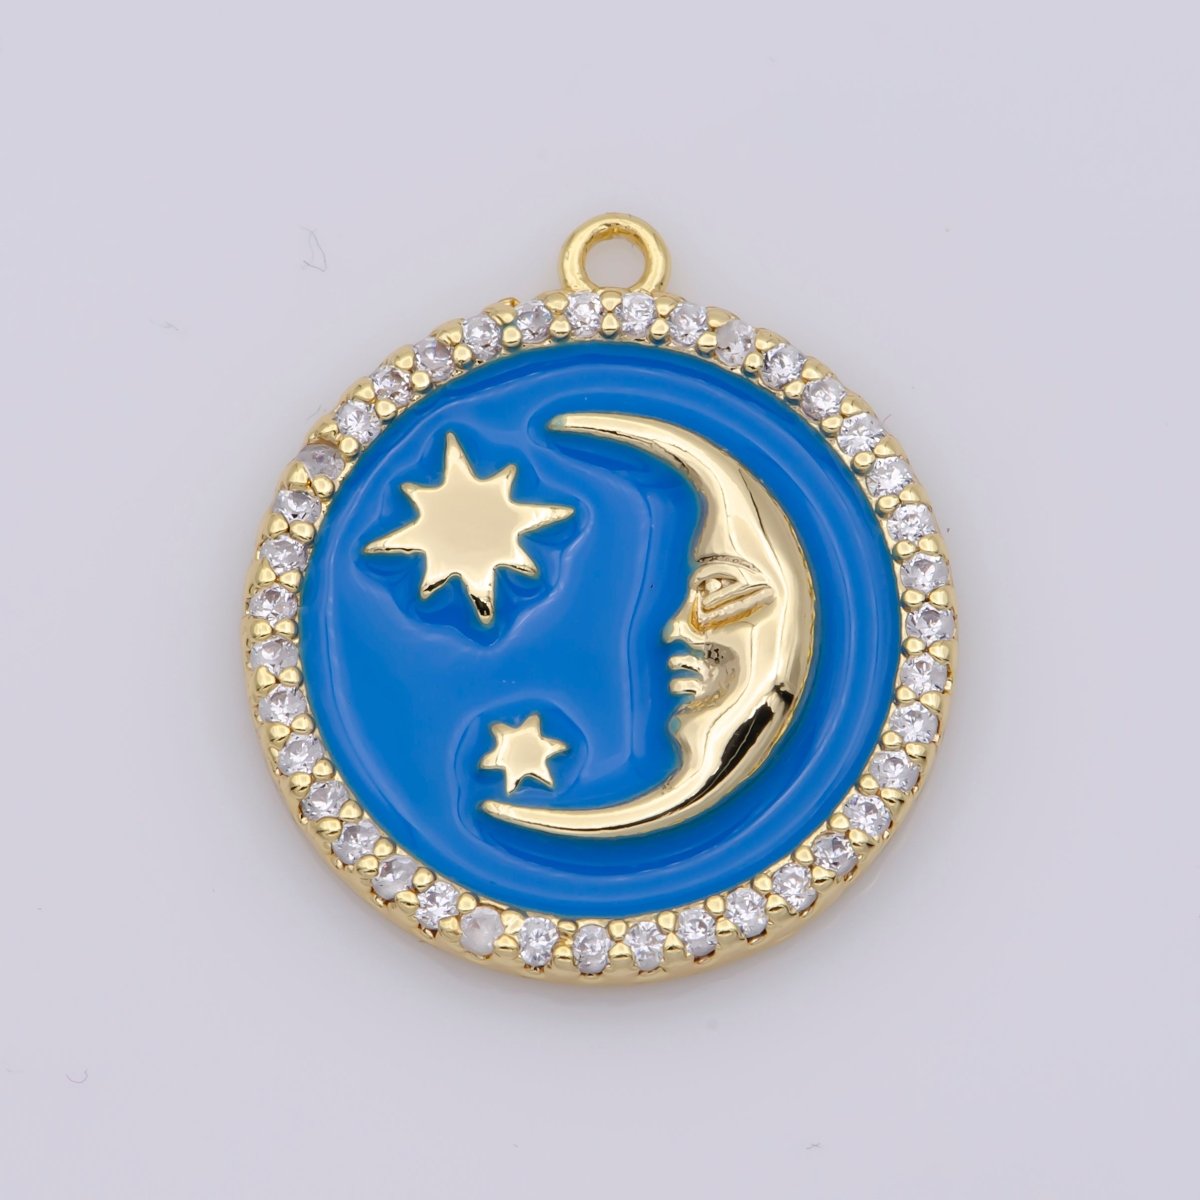 Tiny Celestial Charm White Blue Enamel Moon and Star Charms with Micro Pave Coin Base Moon Charms Jewelry Supplies M-906 - DLUXCA